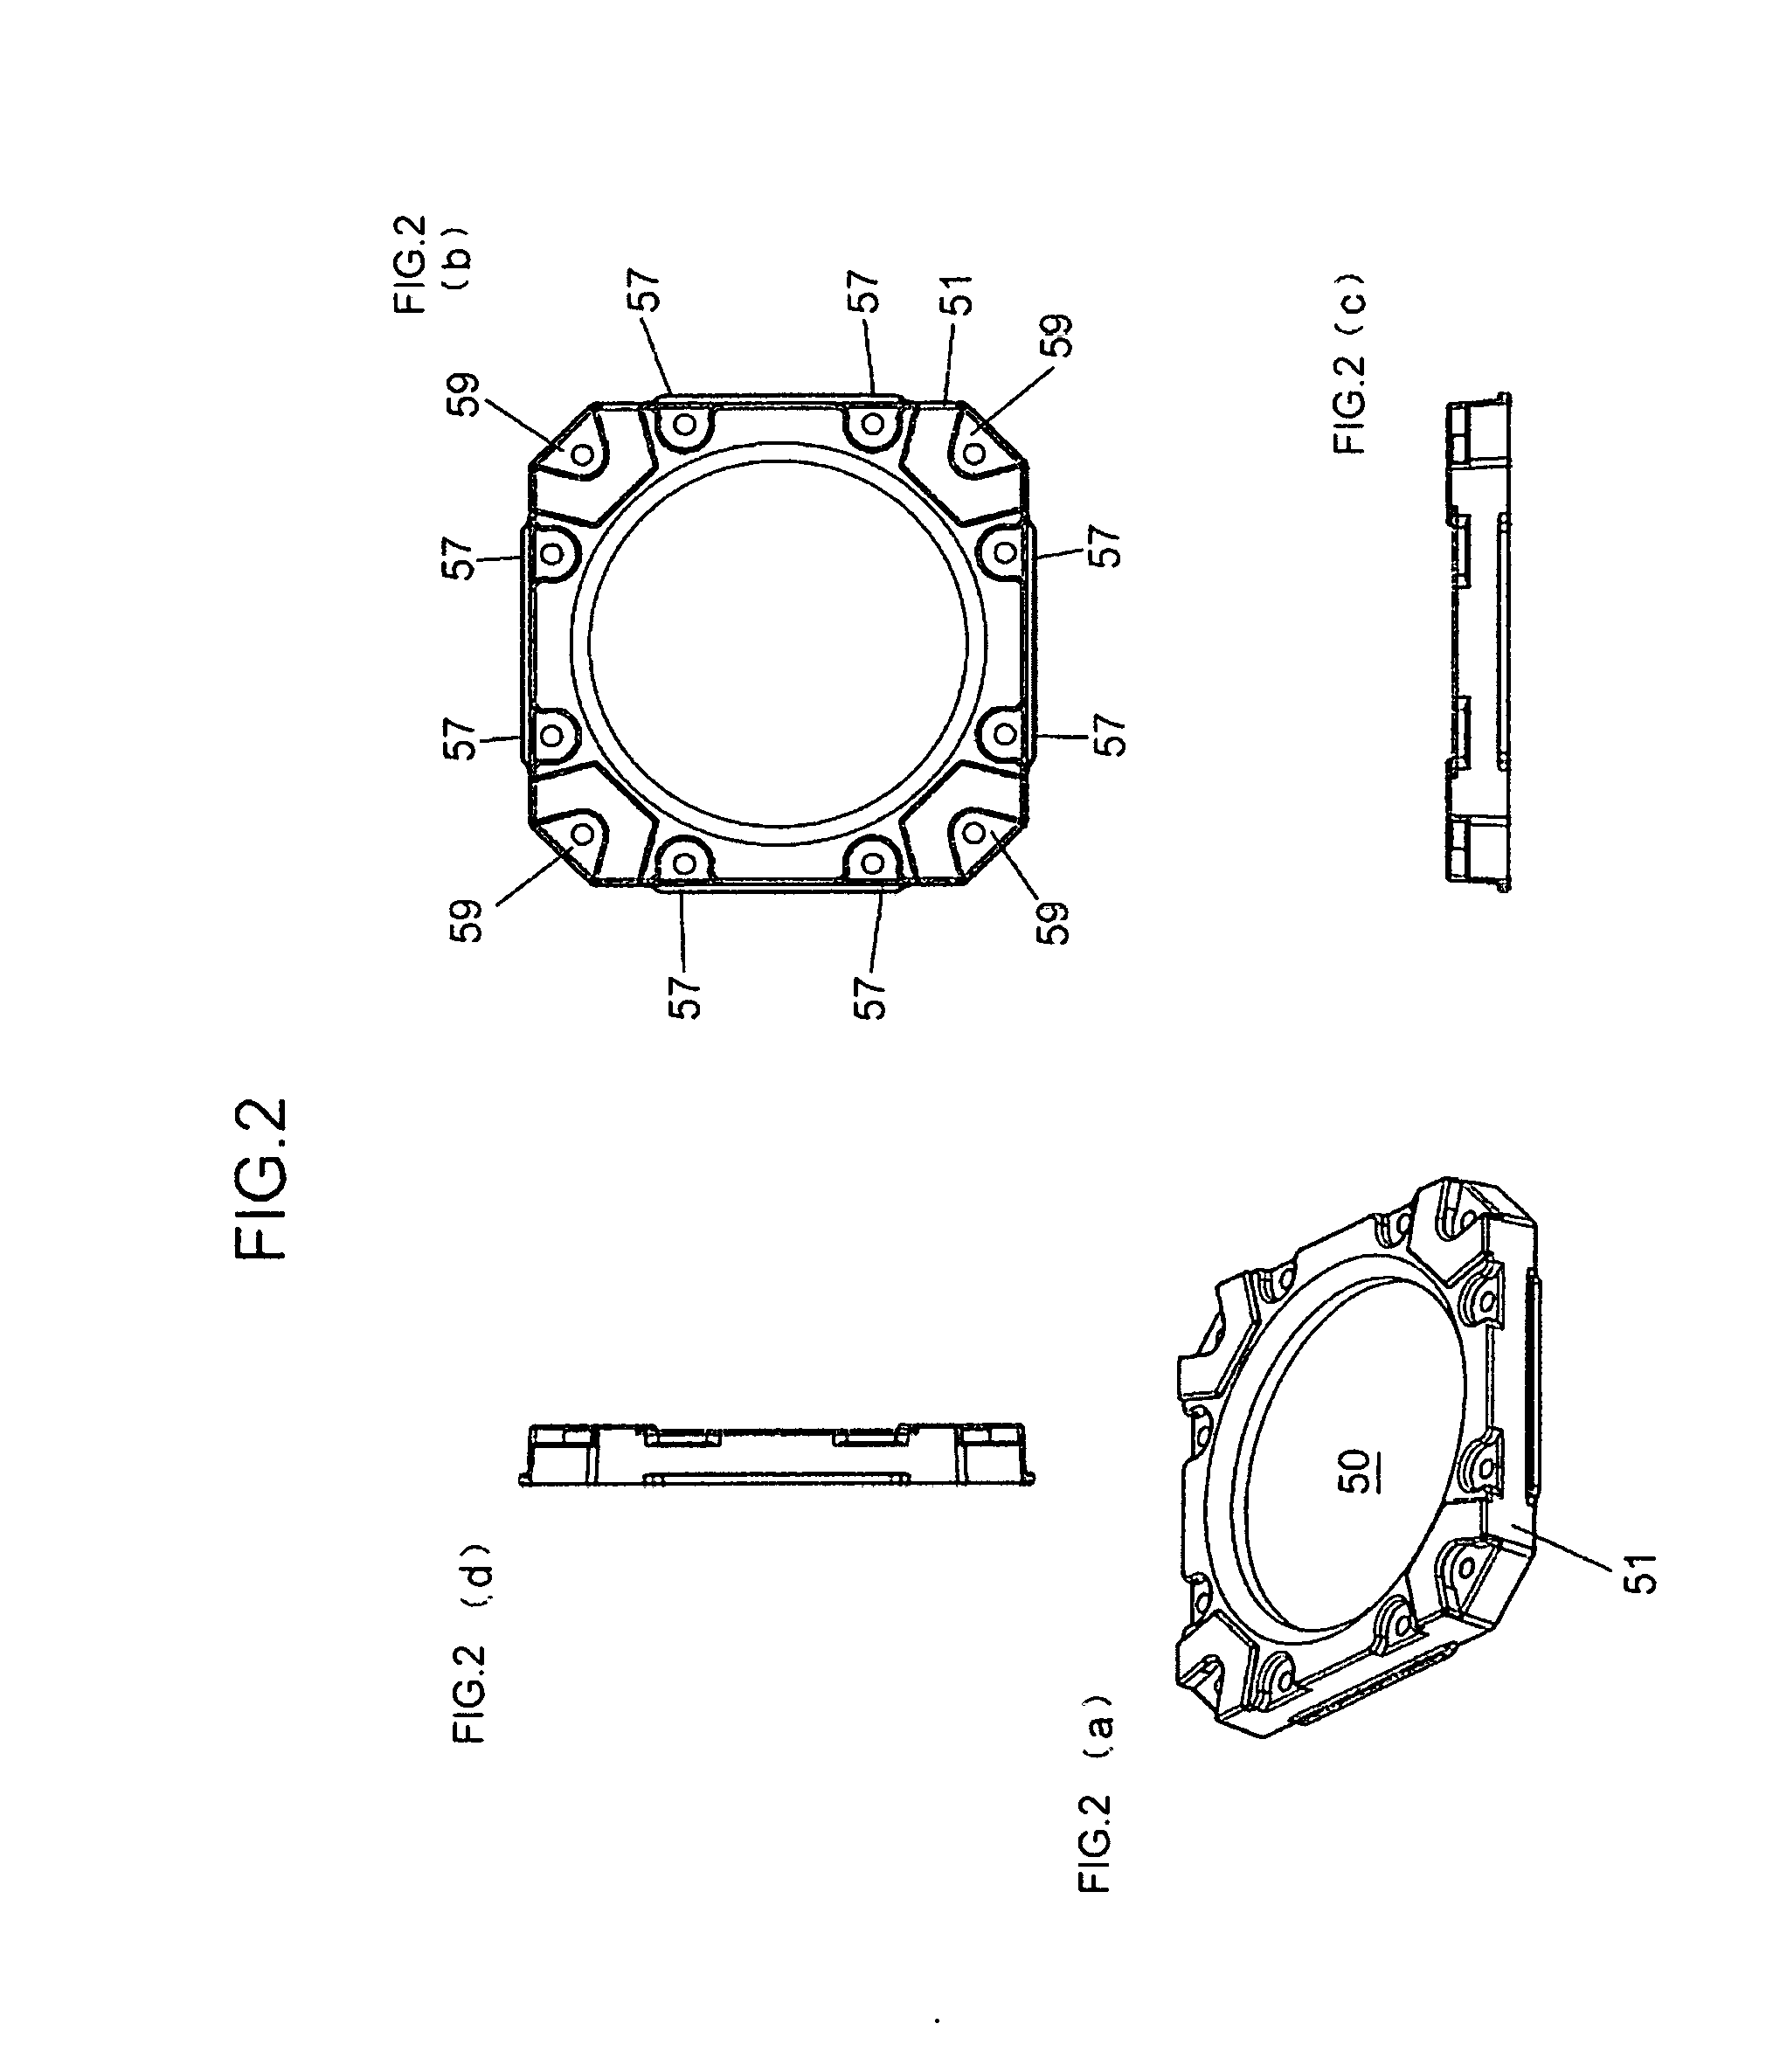 Protective Case for Electronic Camcorders for Air, Land and Underwater Use Employing Dual Lens Covers